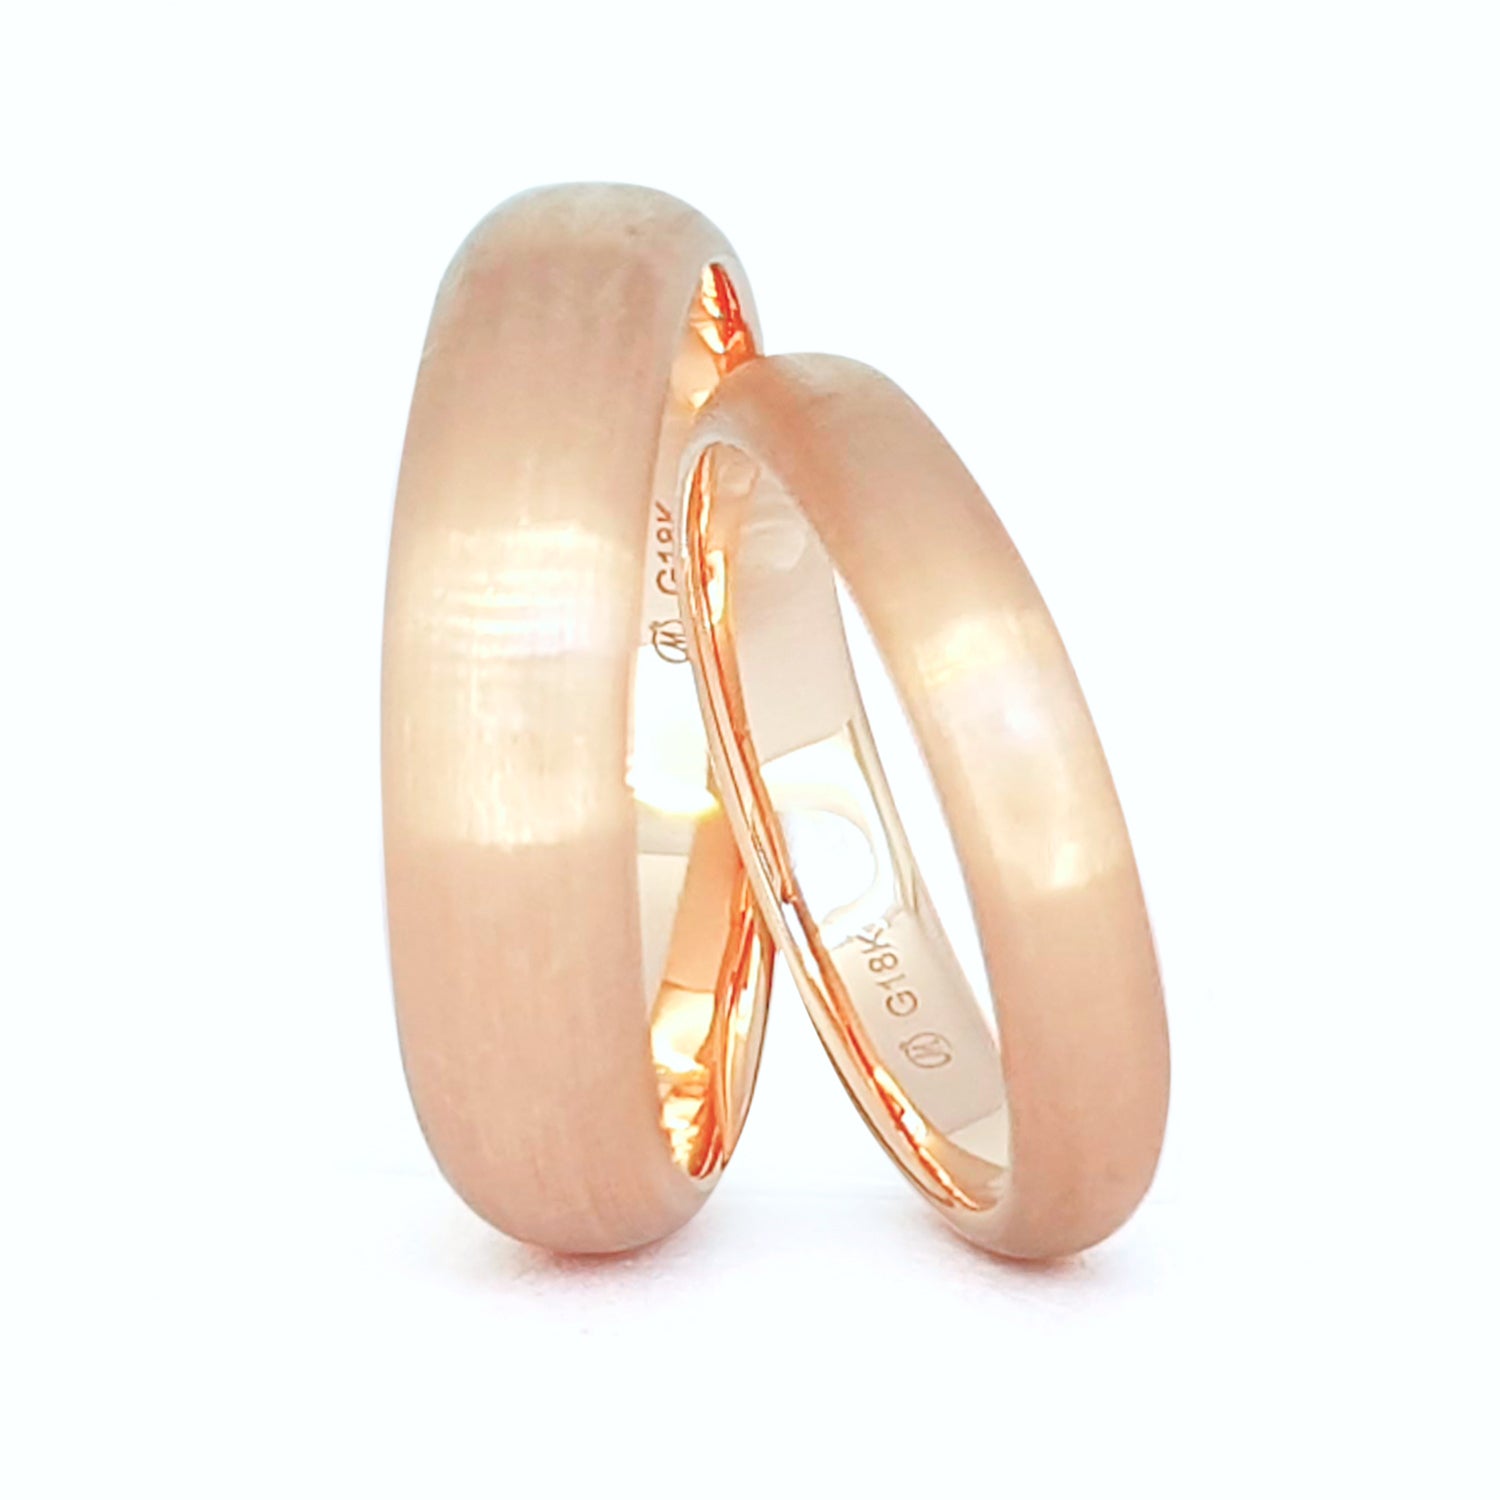 Matching Wedding Rings | Wedding Ring Sets | Meicel Jewelry Store